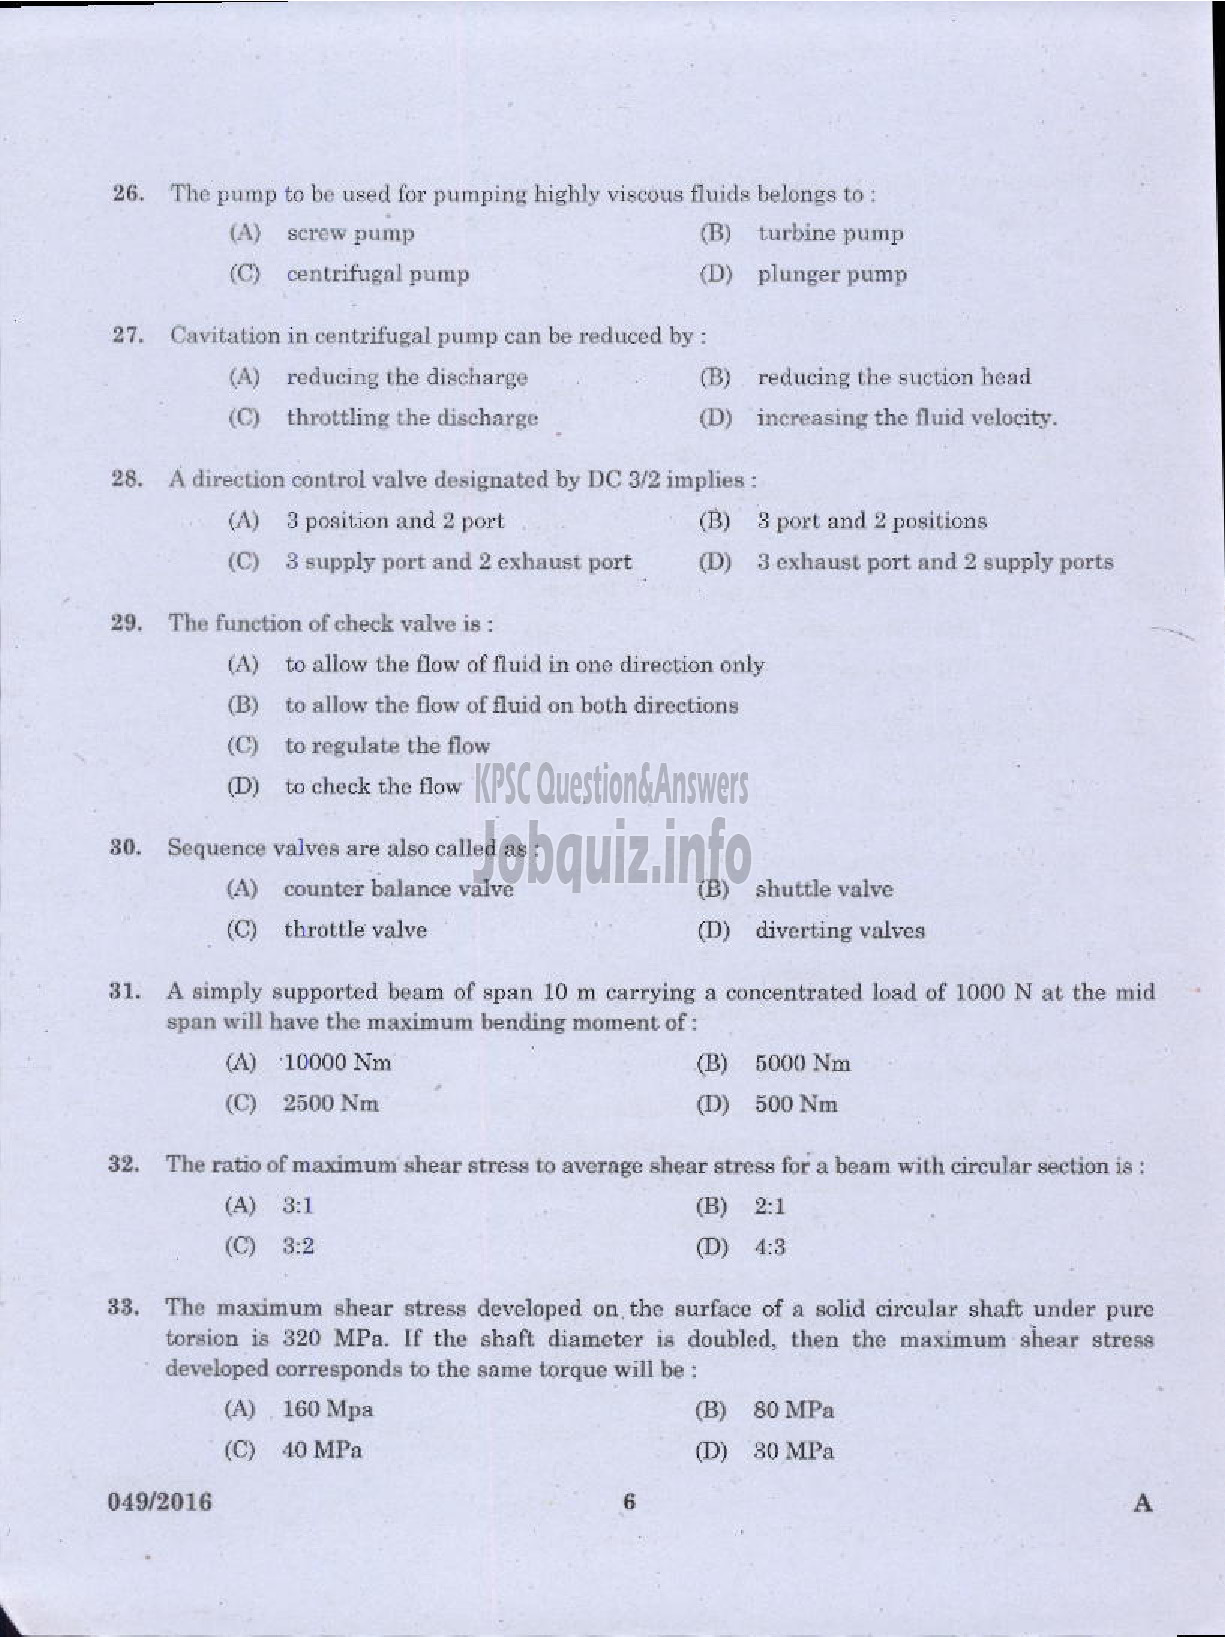 Kerala PSC Question Paper - WORKS MANAGER STATE WATER TRANSPORT-4